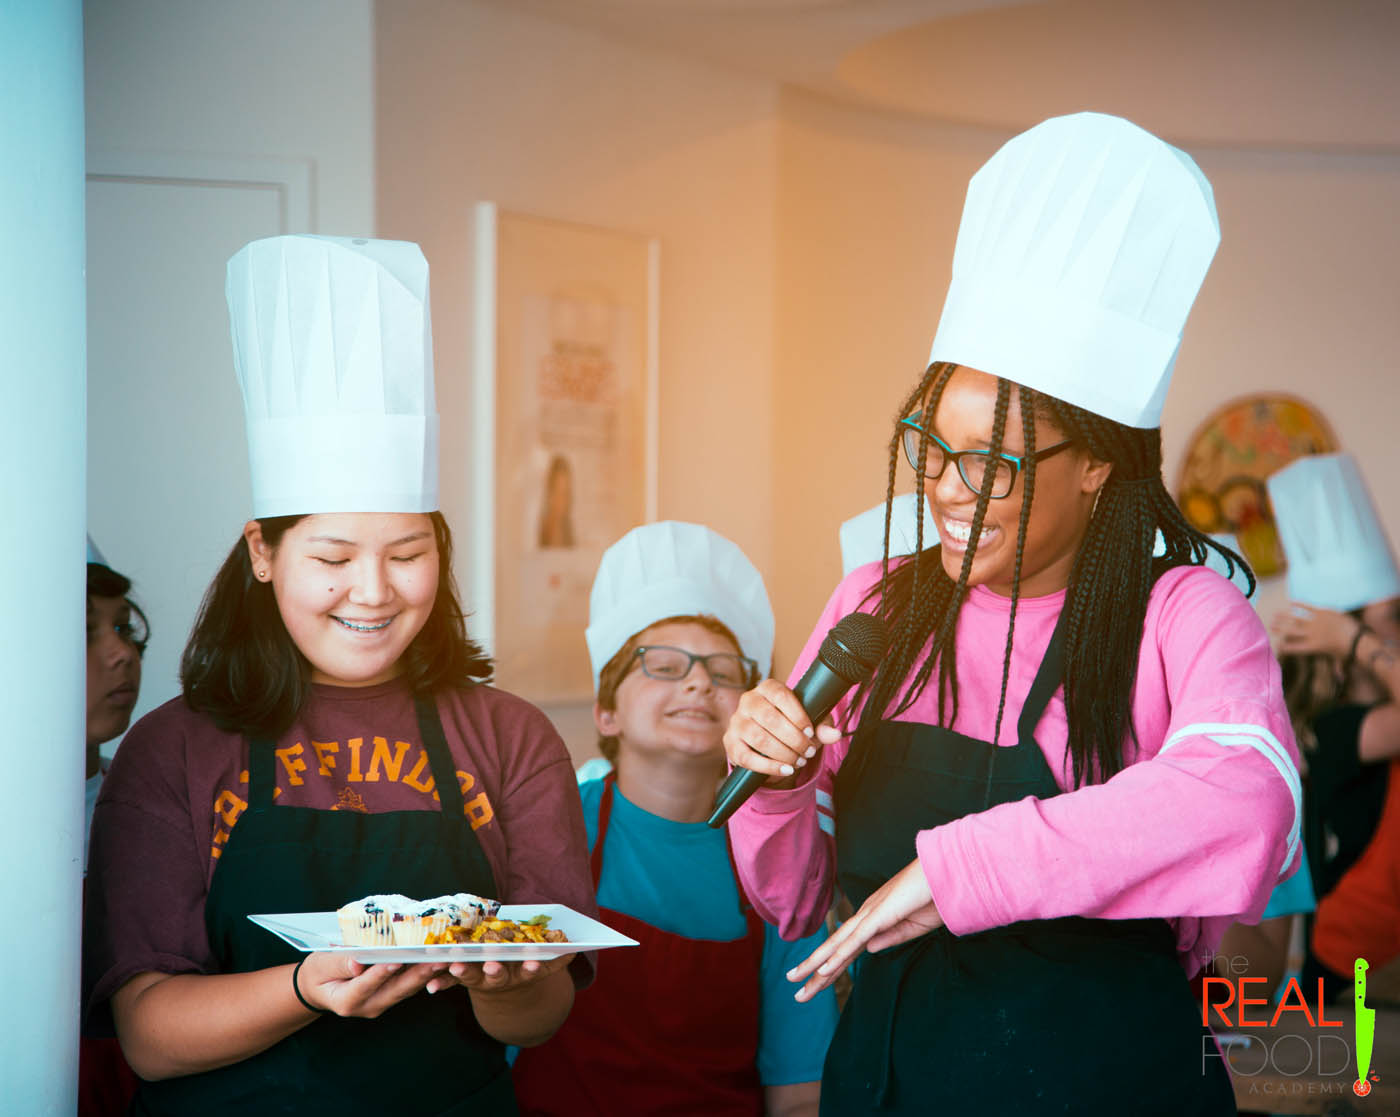 The Real Food Academy Miami - Top Kids Cooking Classes in Miami, FL. Real Food Academy